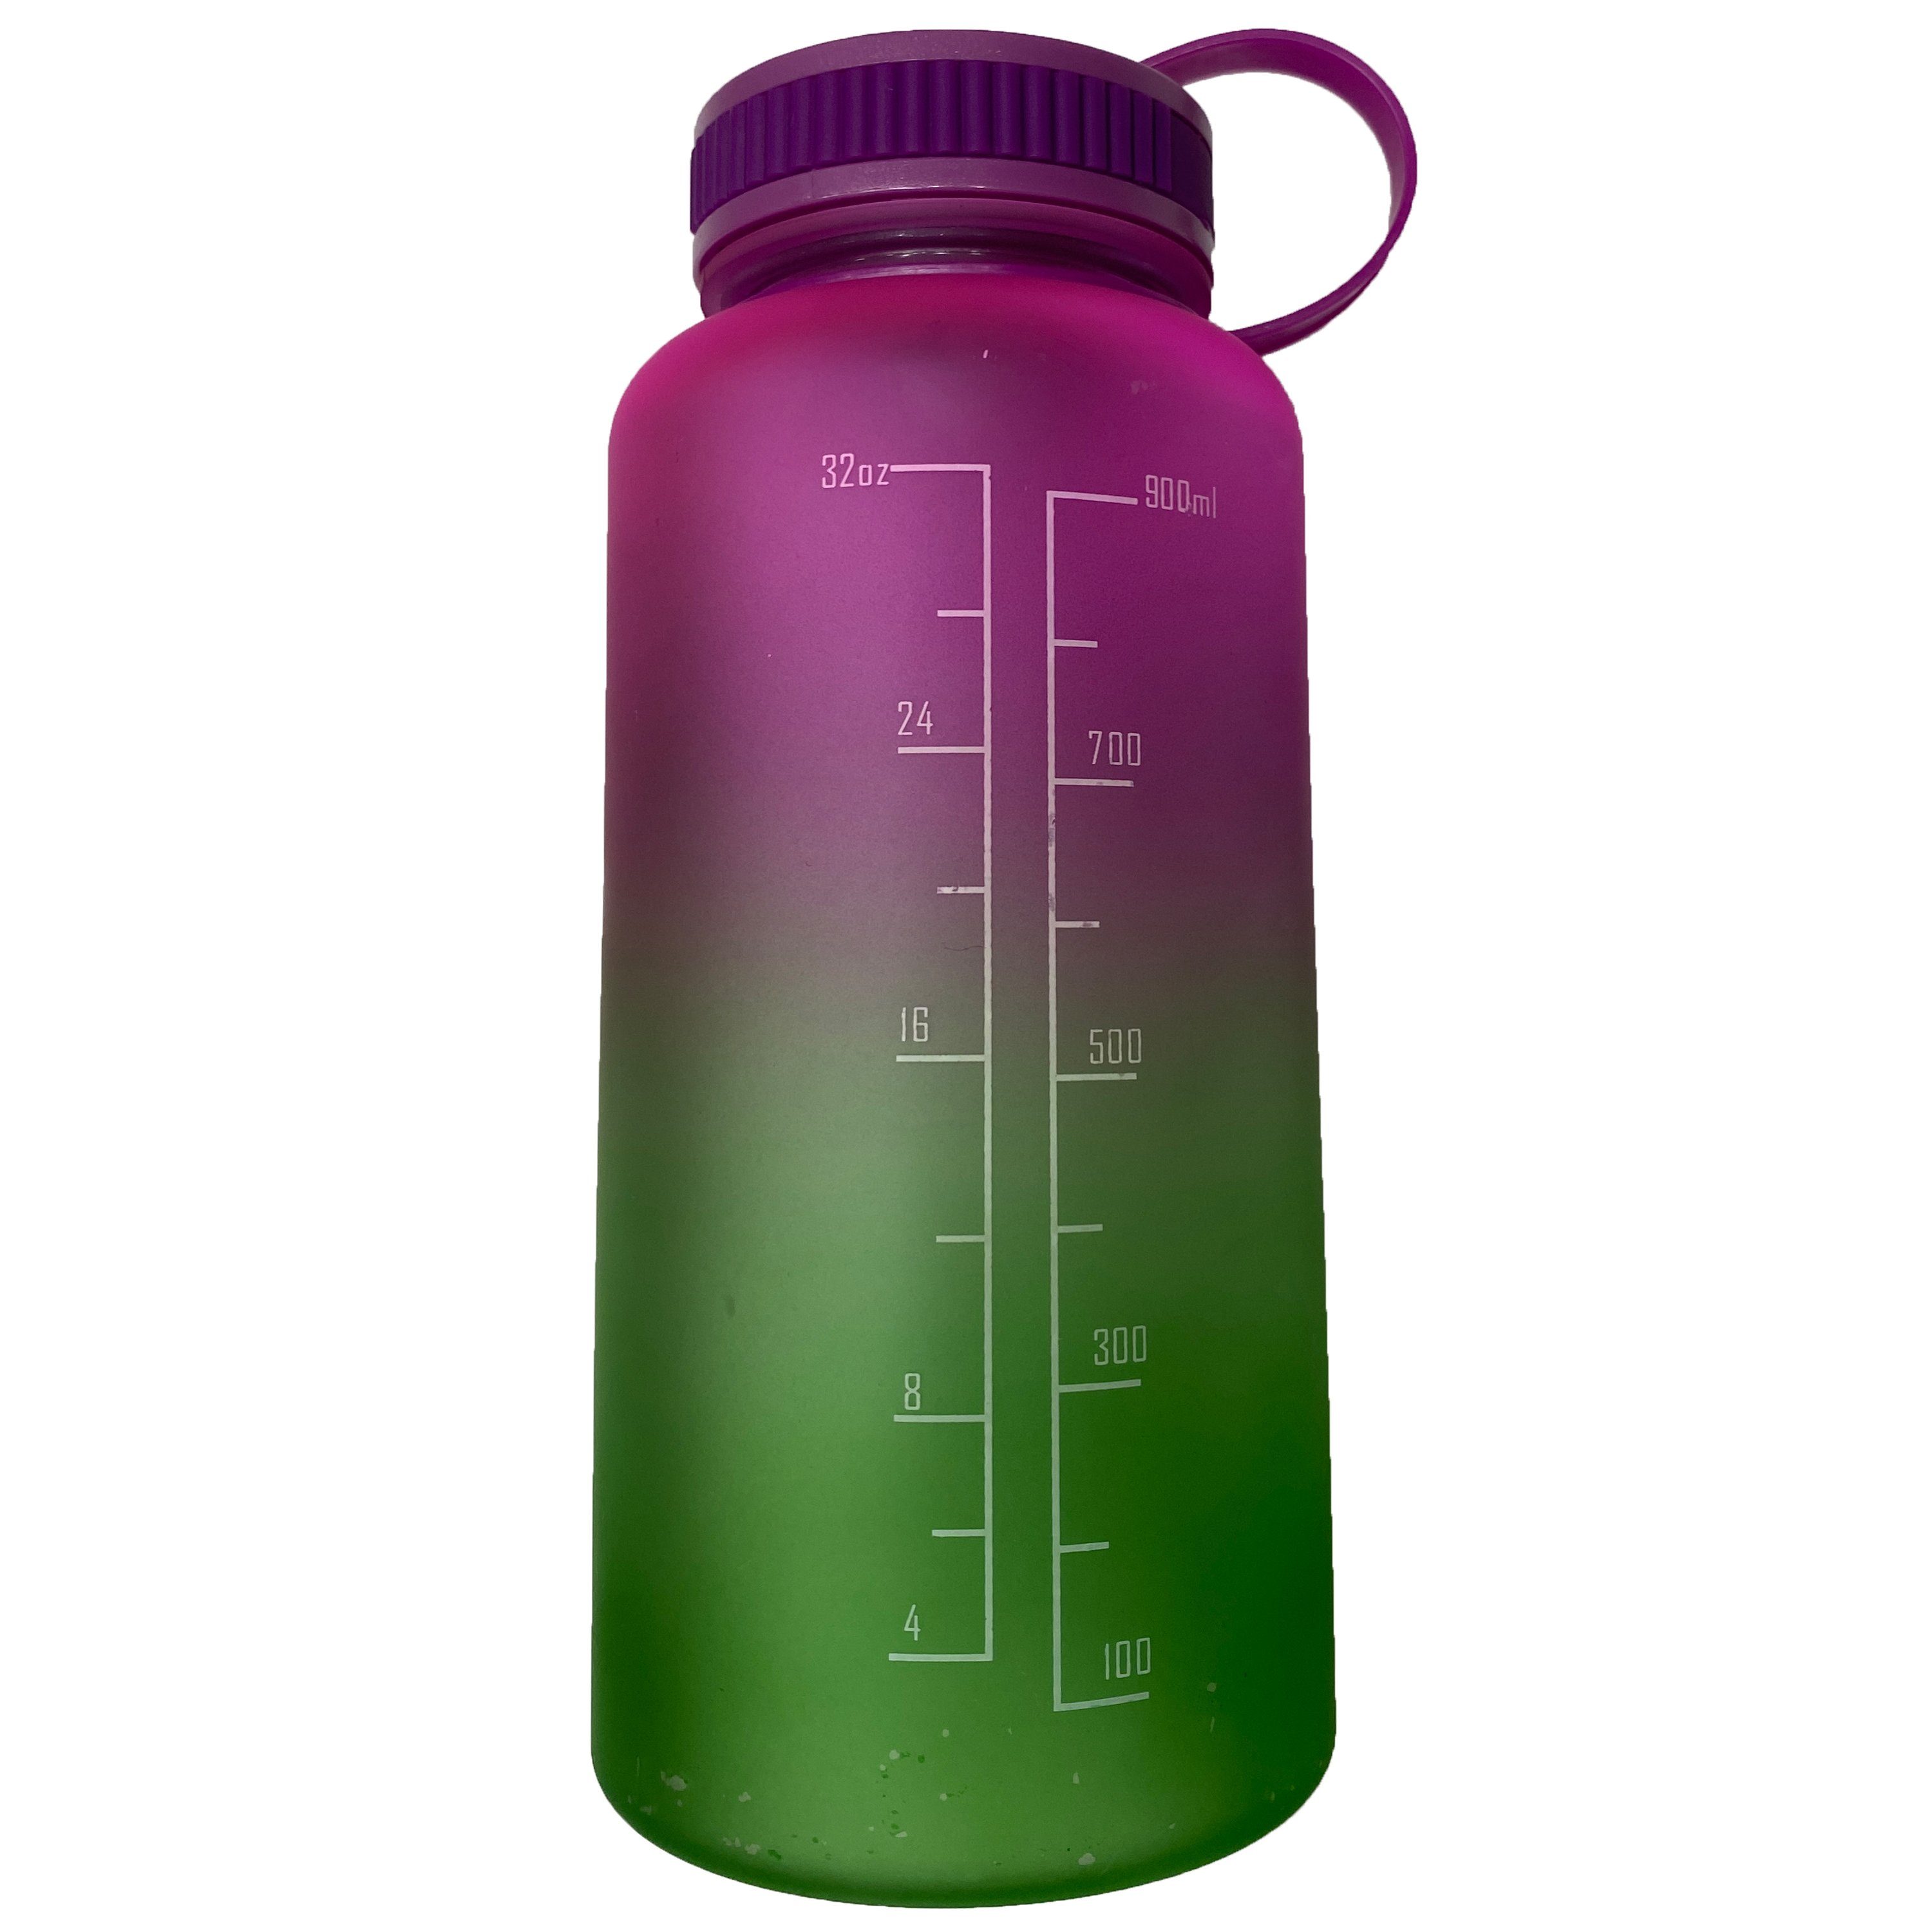 3-Pack Assorted Motivational Water Bottles with Twist Cap